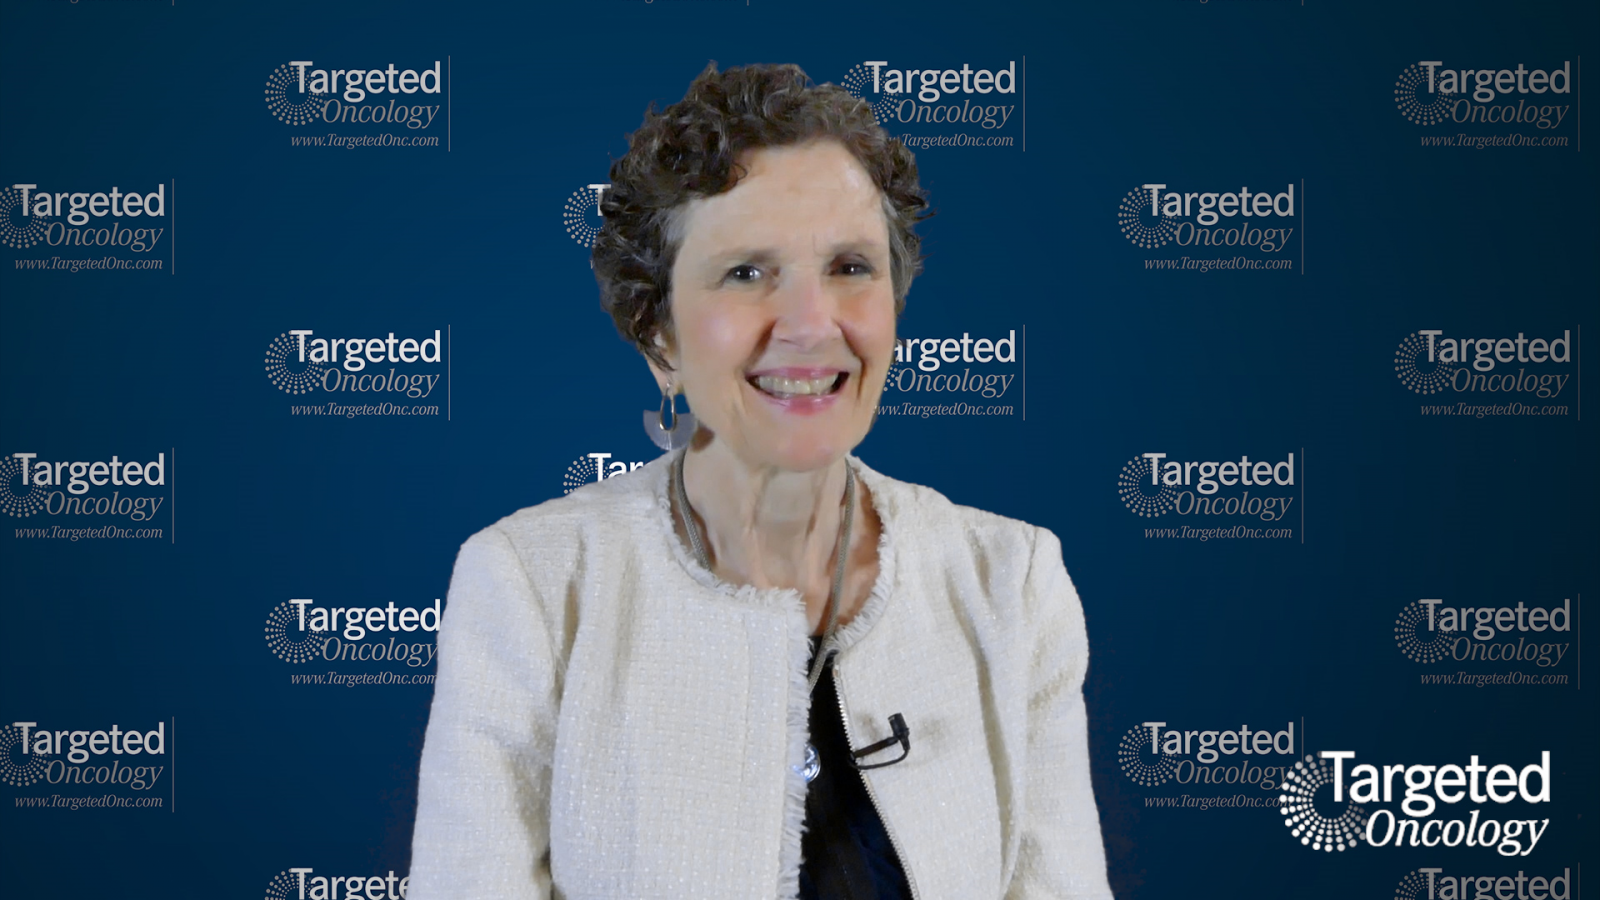 A 54-Year-Old Woman With Stage 2 HER2+ Breast Cancer